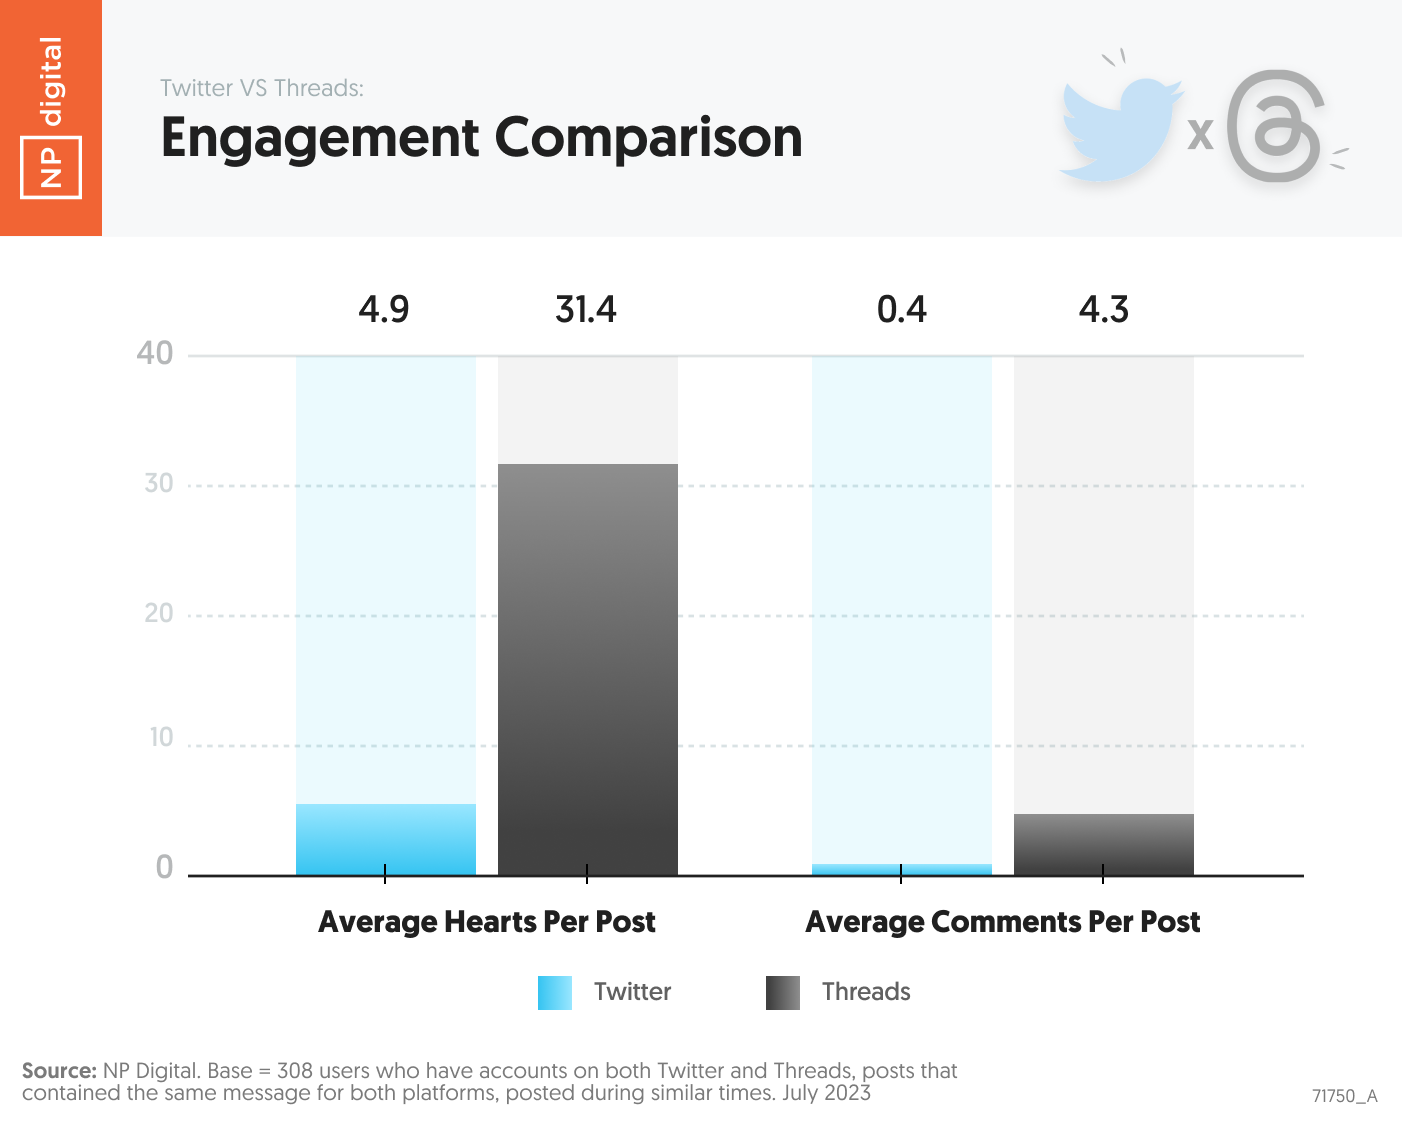 A graphic showing engagement comparison between Twitter and Threads.